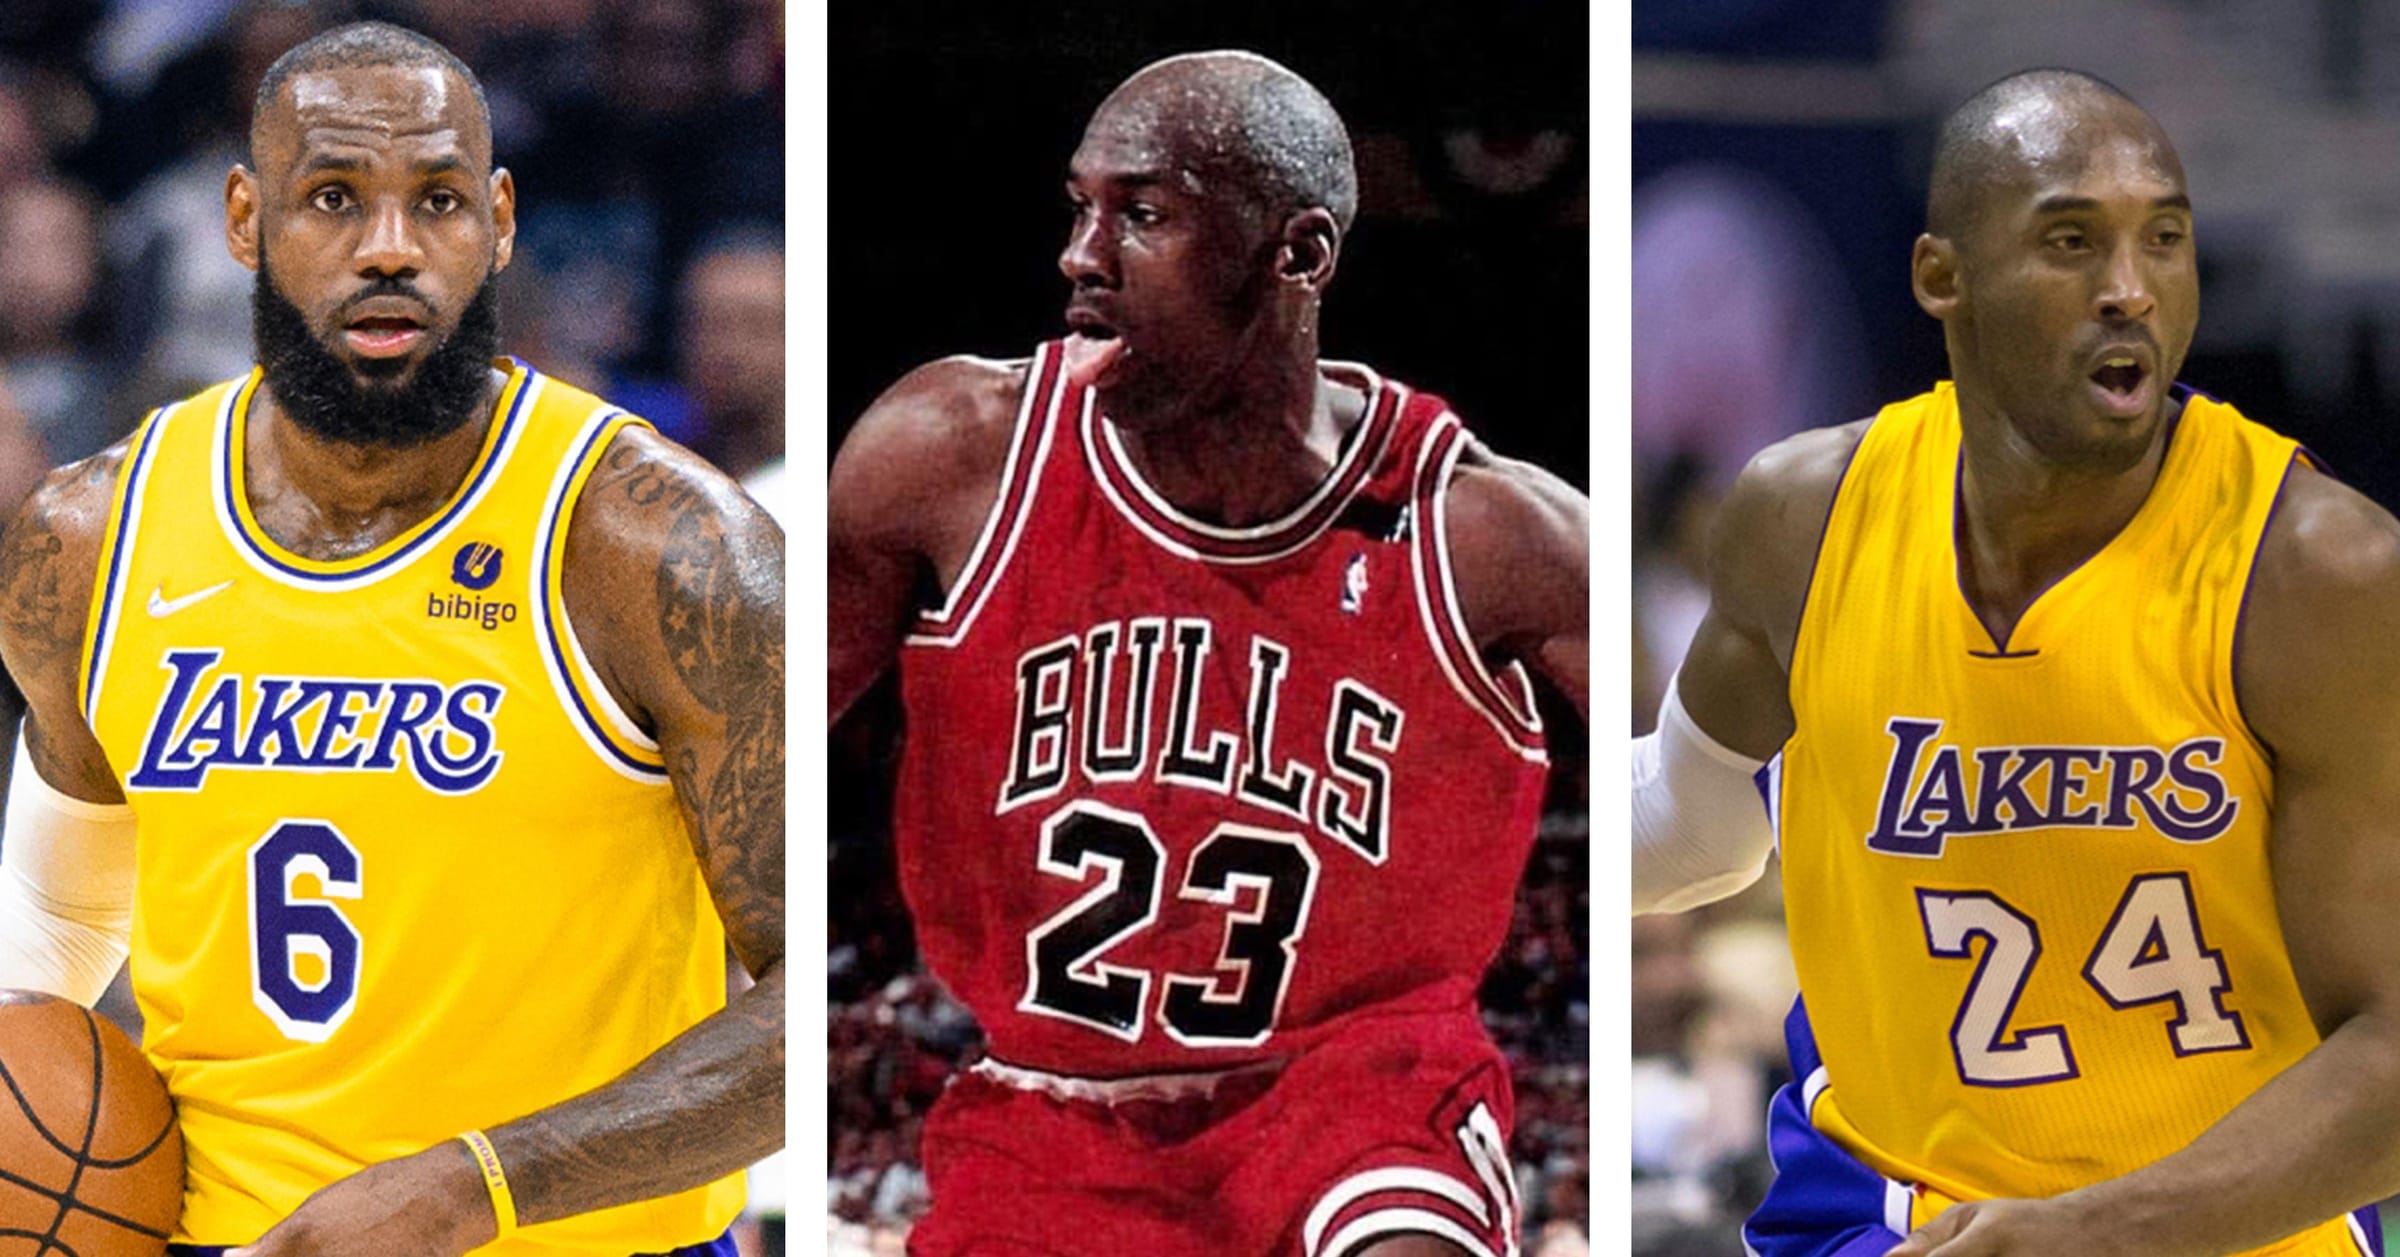 The 20 Greatest NBA Players of All Time — The Sporting Blog